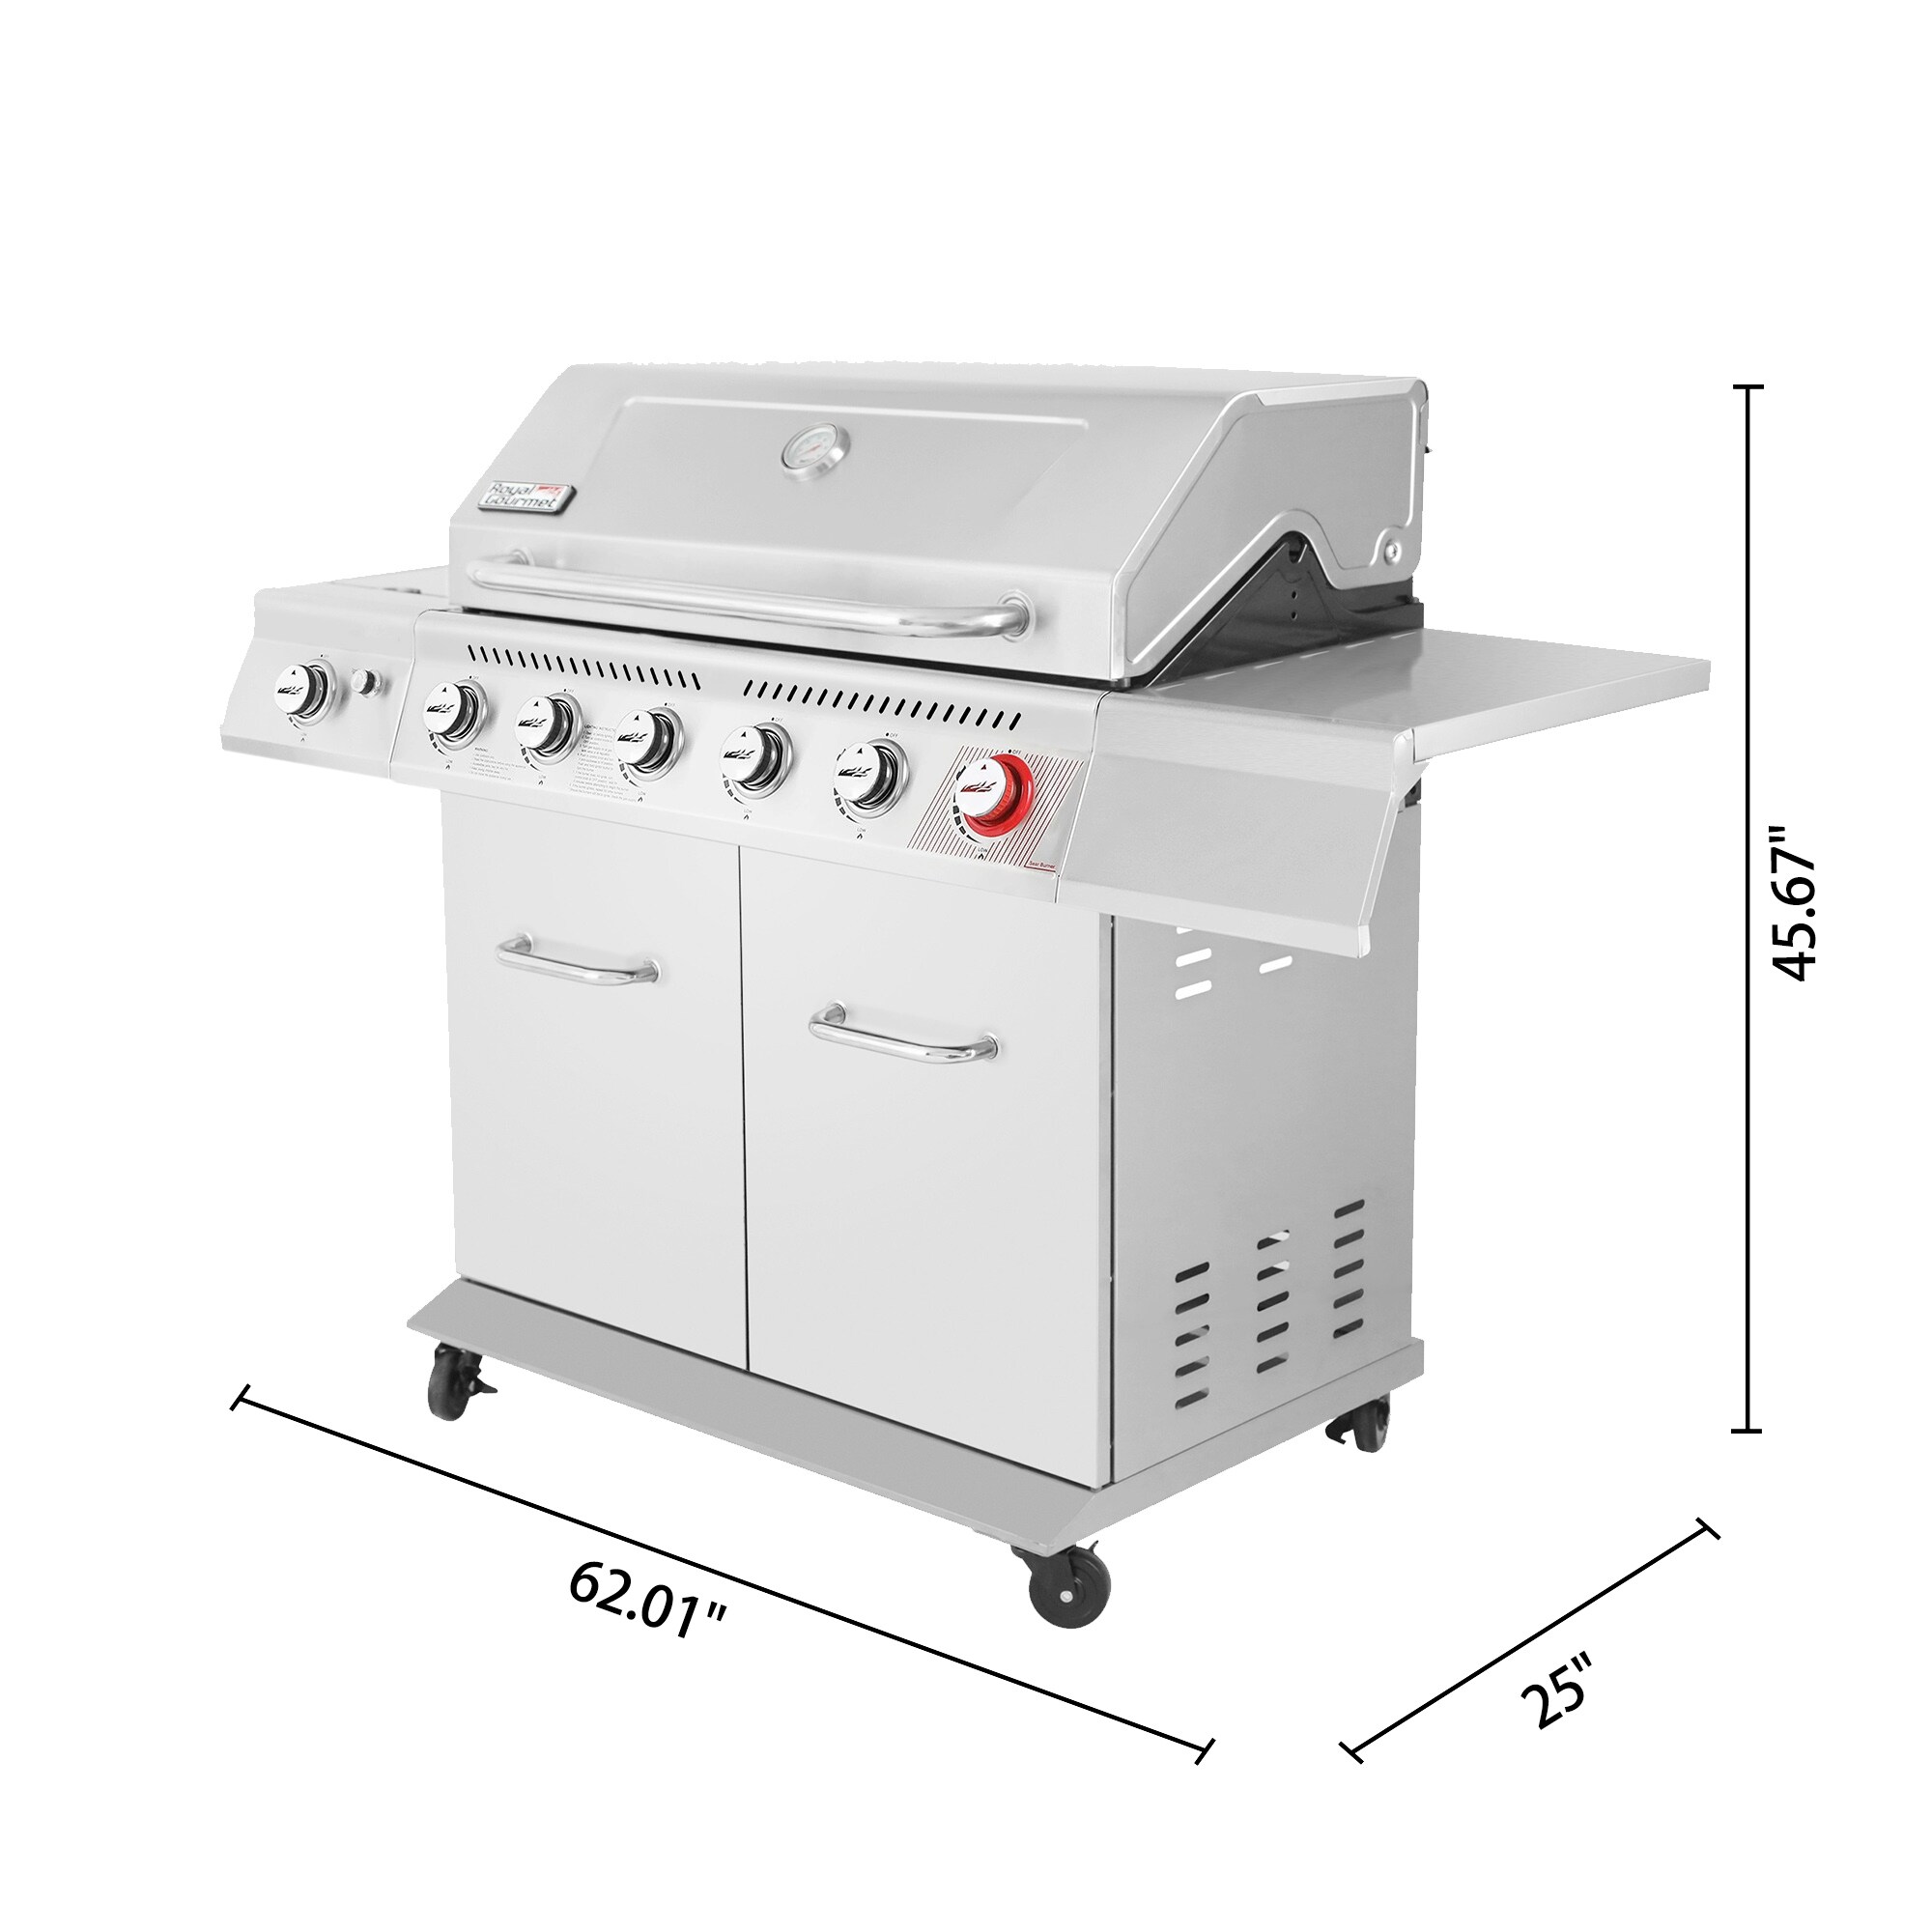 Royal Gourmet Stainless Grill, On and Premier Side Gas Grill - Silver Burner, Sear Beyond - Burner - Bed BBQ Bath with & Steel Sale 36898562 6-Burner